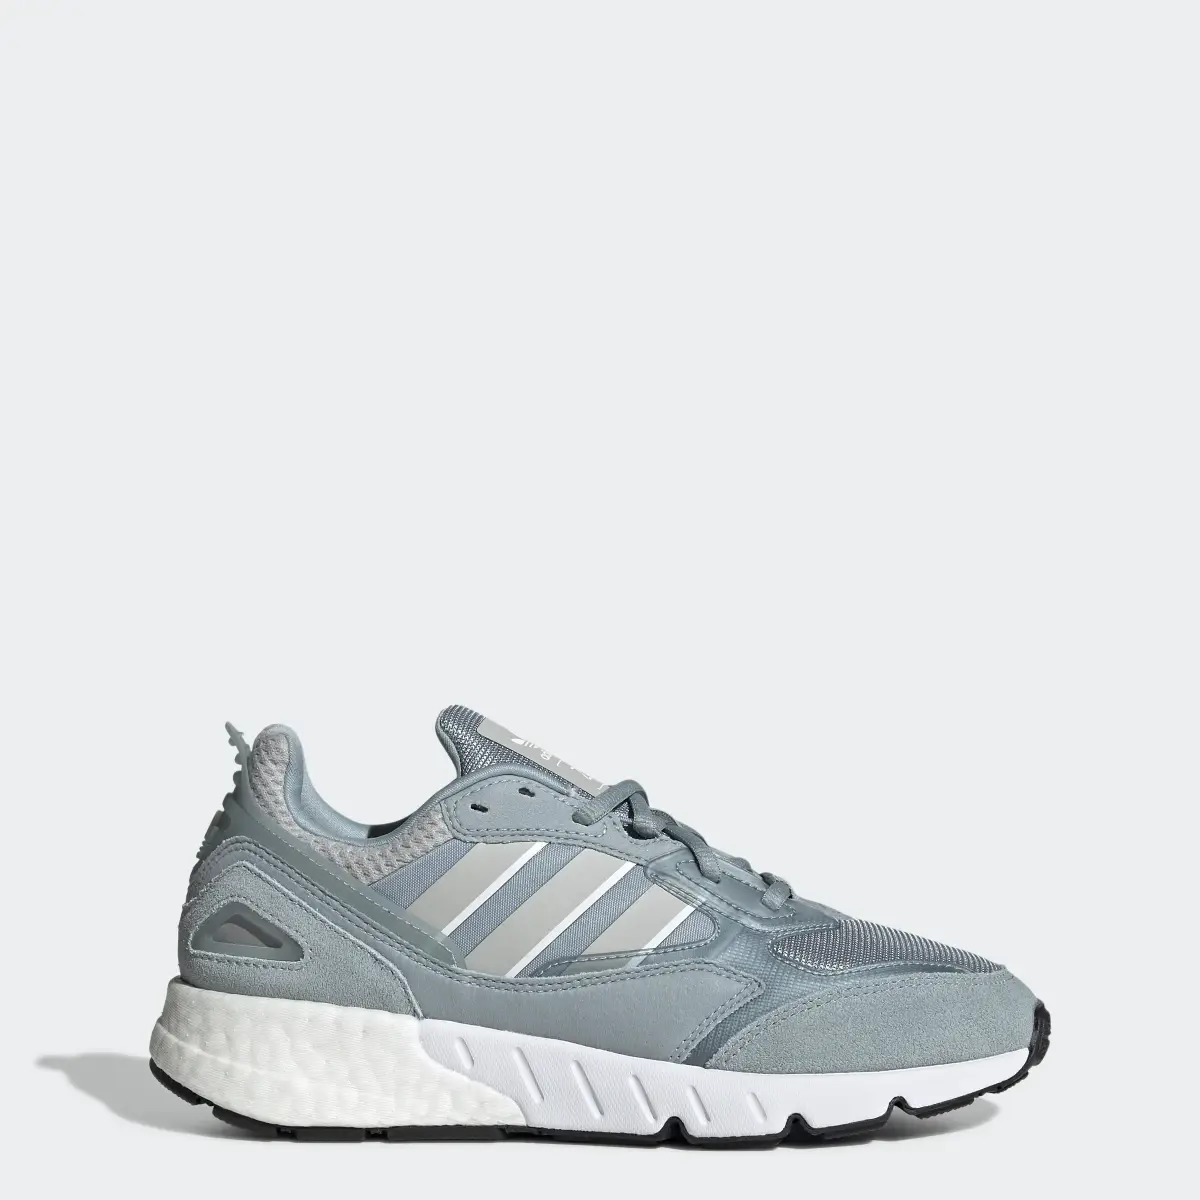 Adidas ZX 1K BOOST 2.0 Shoes. 1